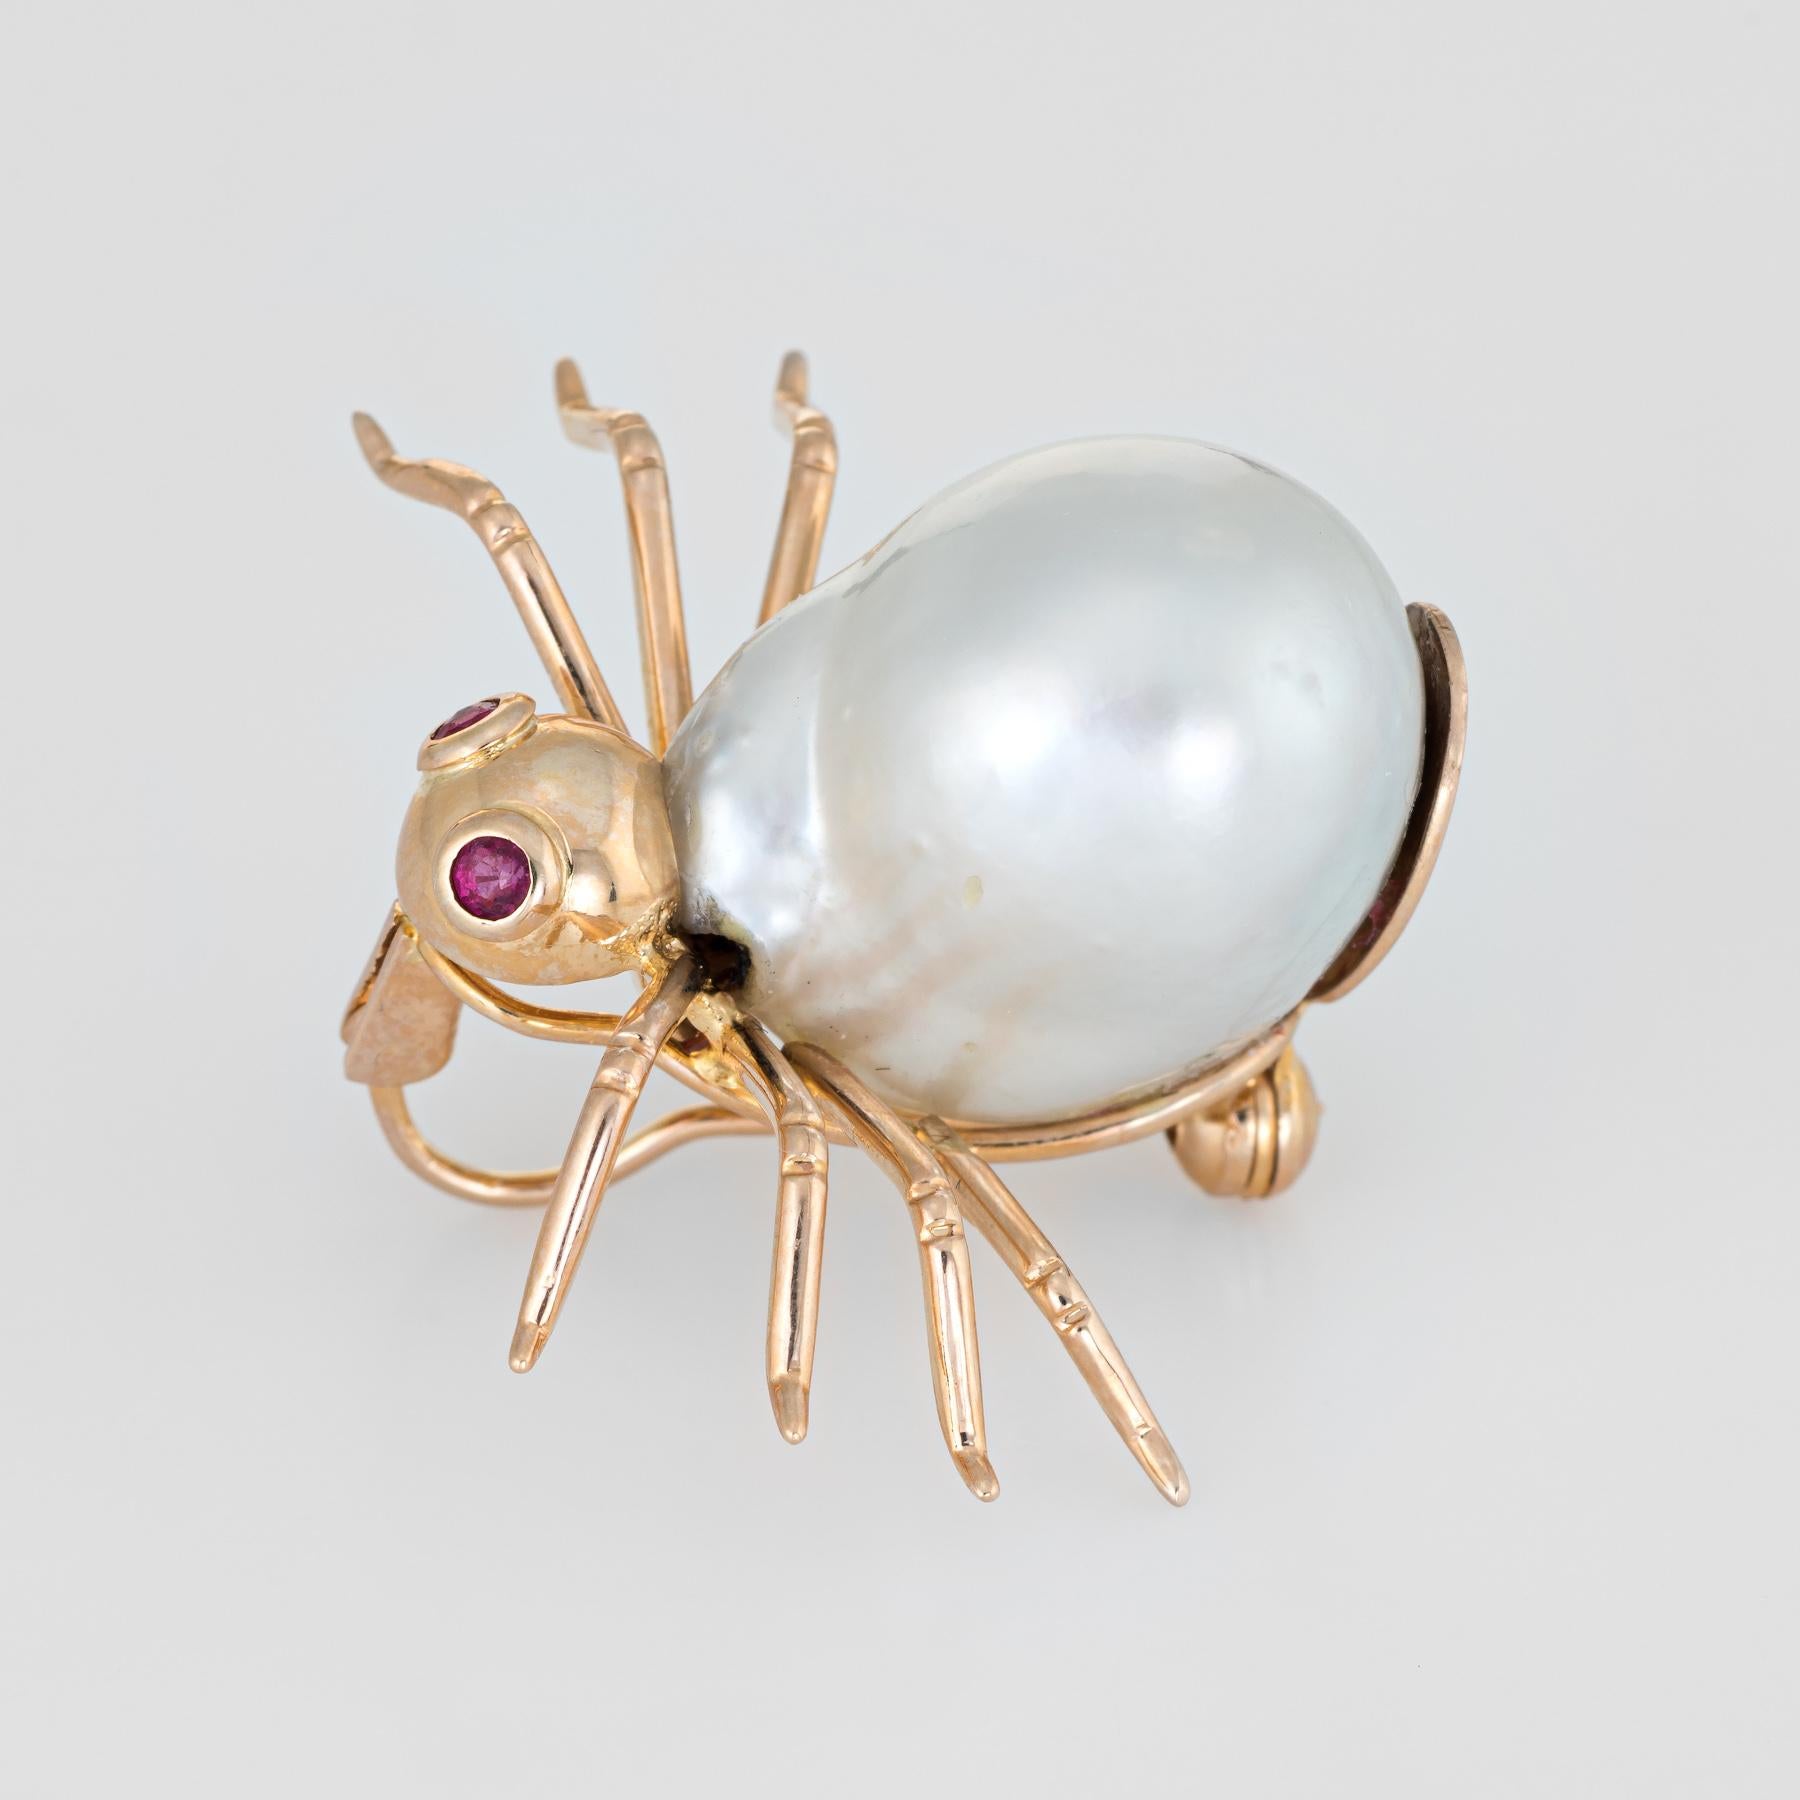 Finely detailed vintage spider brooch, crafted in 14 karat yellow gold.  

Two approx. 0.02 carat rubies are set into the eyes, accented with a 16mm x 13mm cultured baroque pearl in the body of the spider.    

The piece was made as a brooch yet it